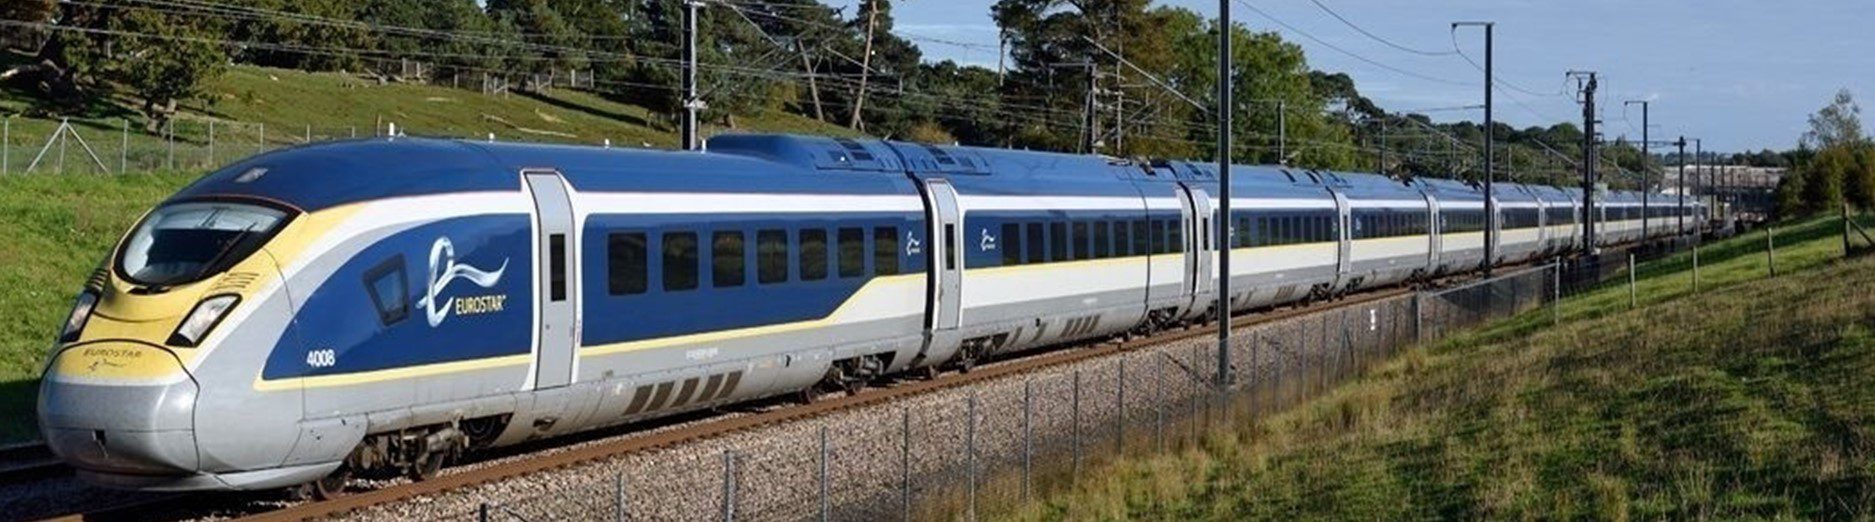 a blue, grey and yellow train on train tracks viewed from a front/side angle